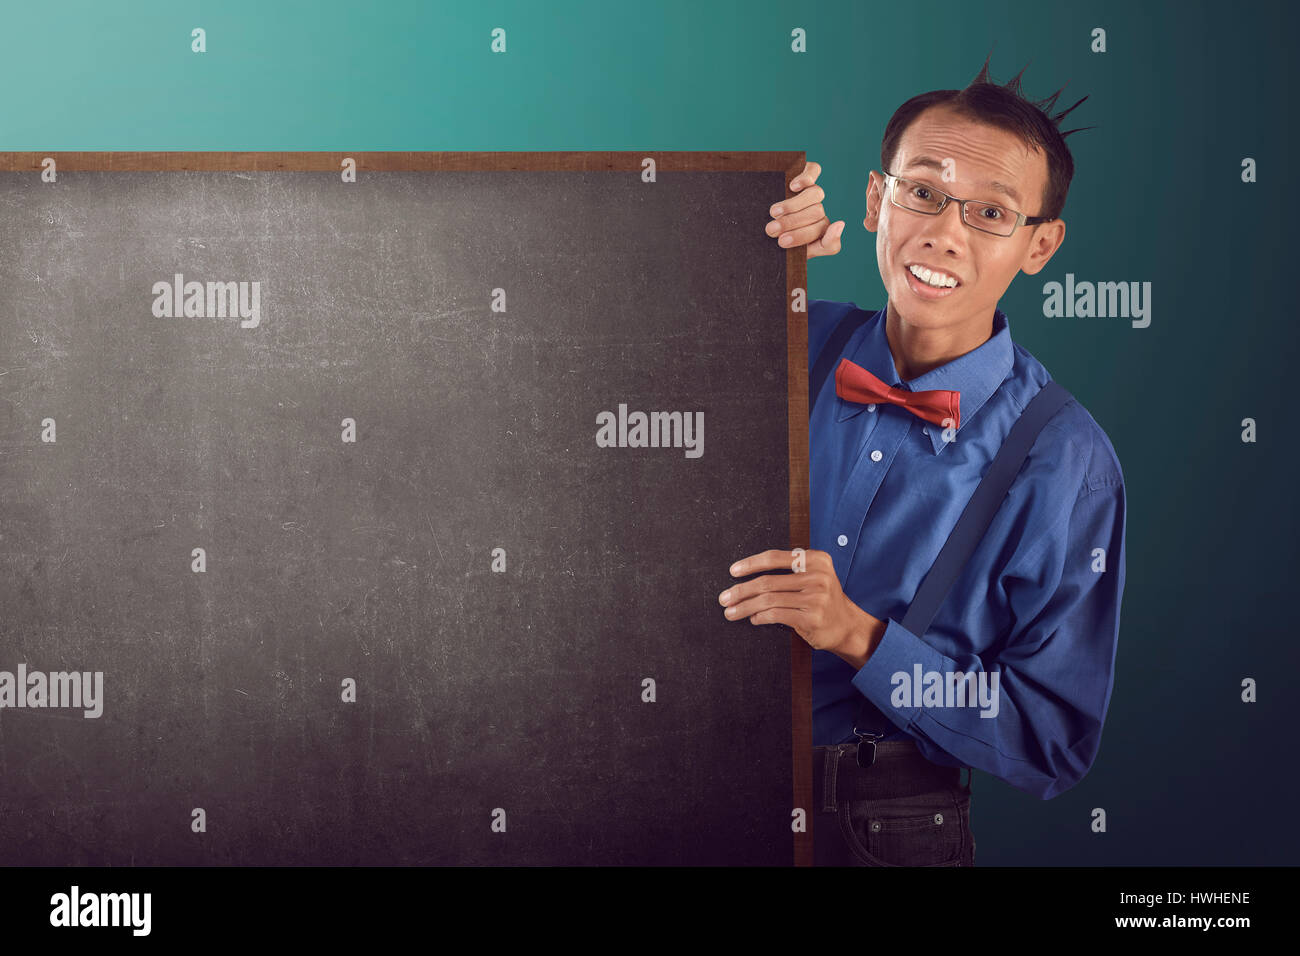 Nerdy man holding blank board, wearing blue shirt, suspender, bow tie and glasses. indoor background Stock Photo